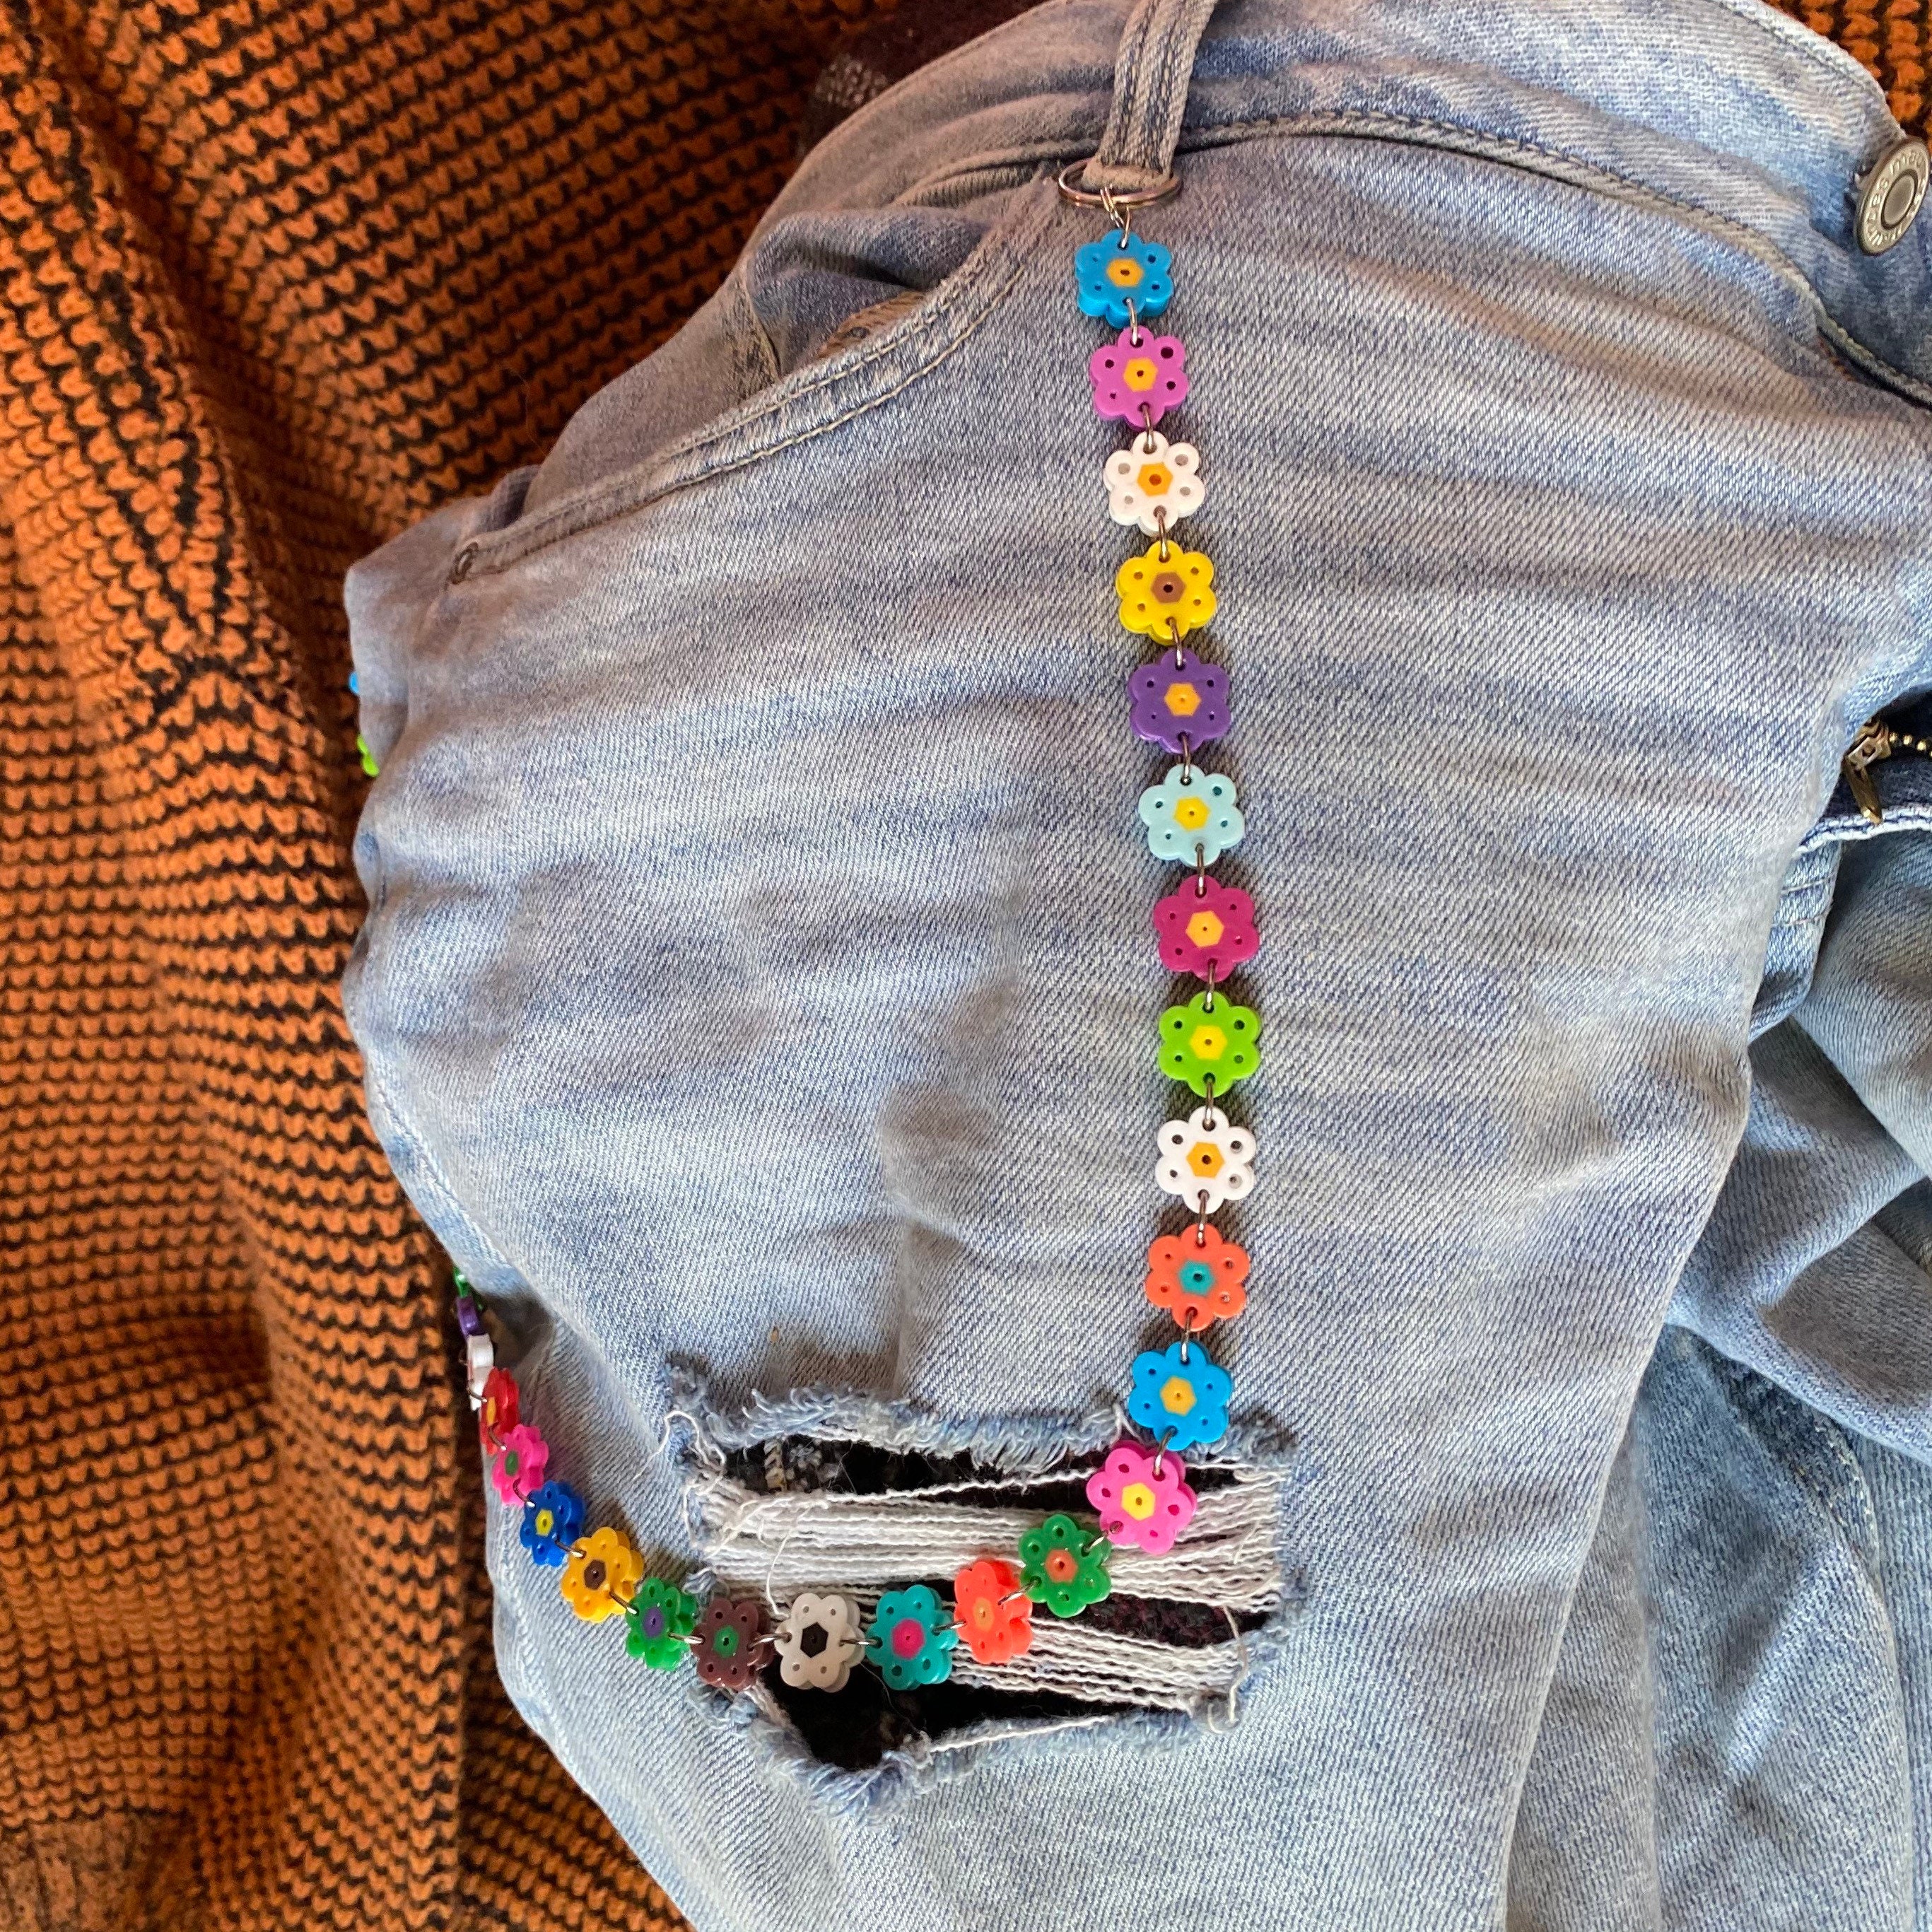 Rainbow Daisy Jean Chain Super Cute and Fun Perler Bead Daisy Jean Chains  22 Inches Long With Heavy Duty Jump Rings and Extra Flowers 